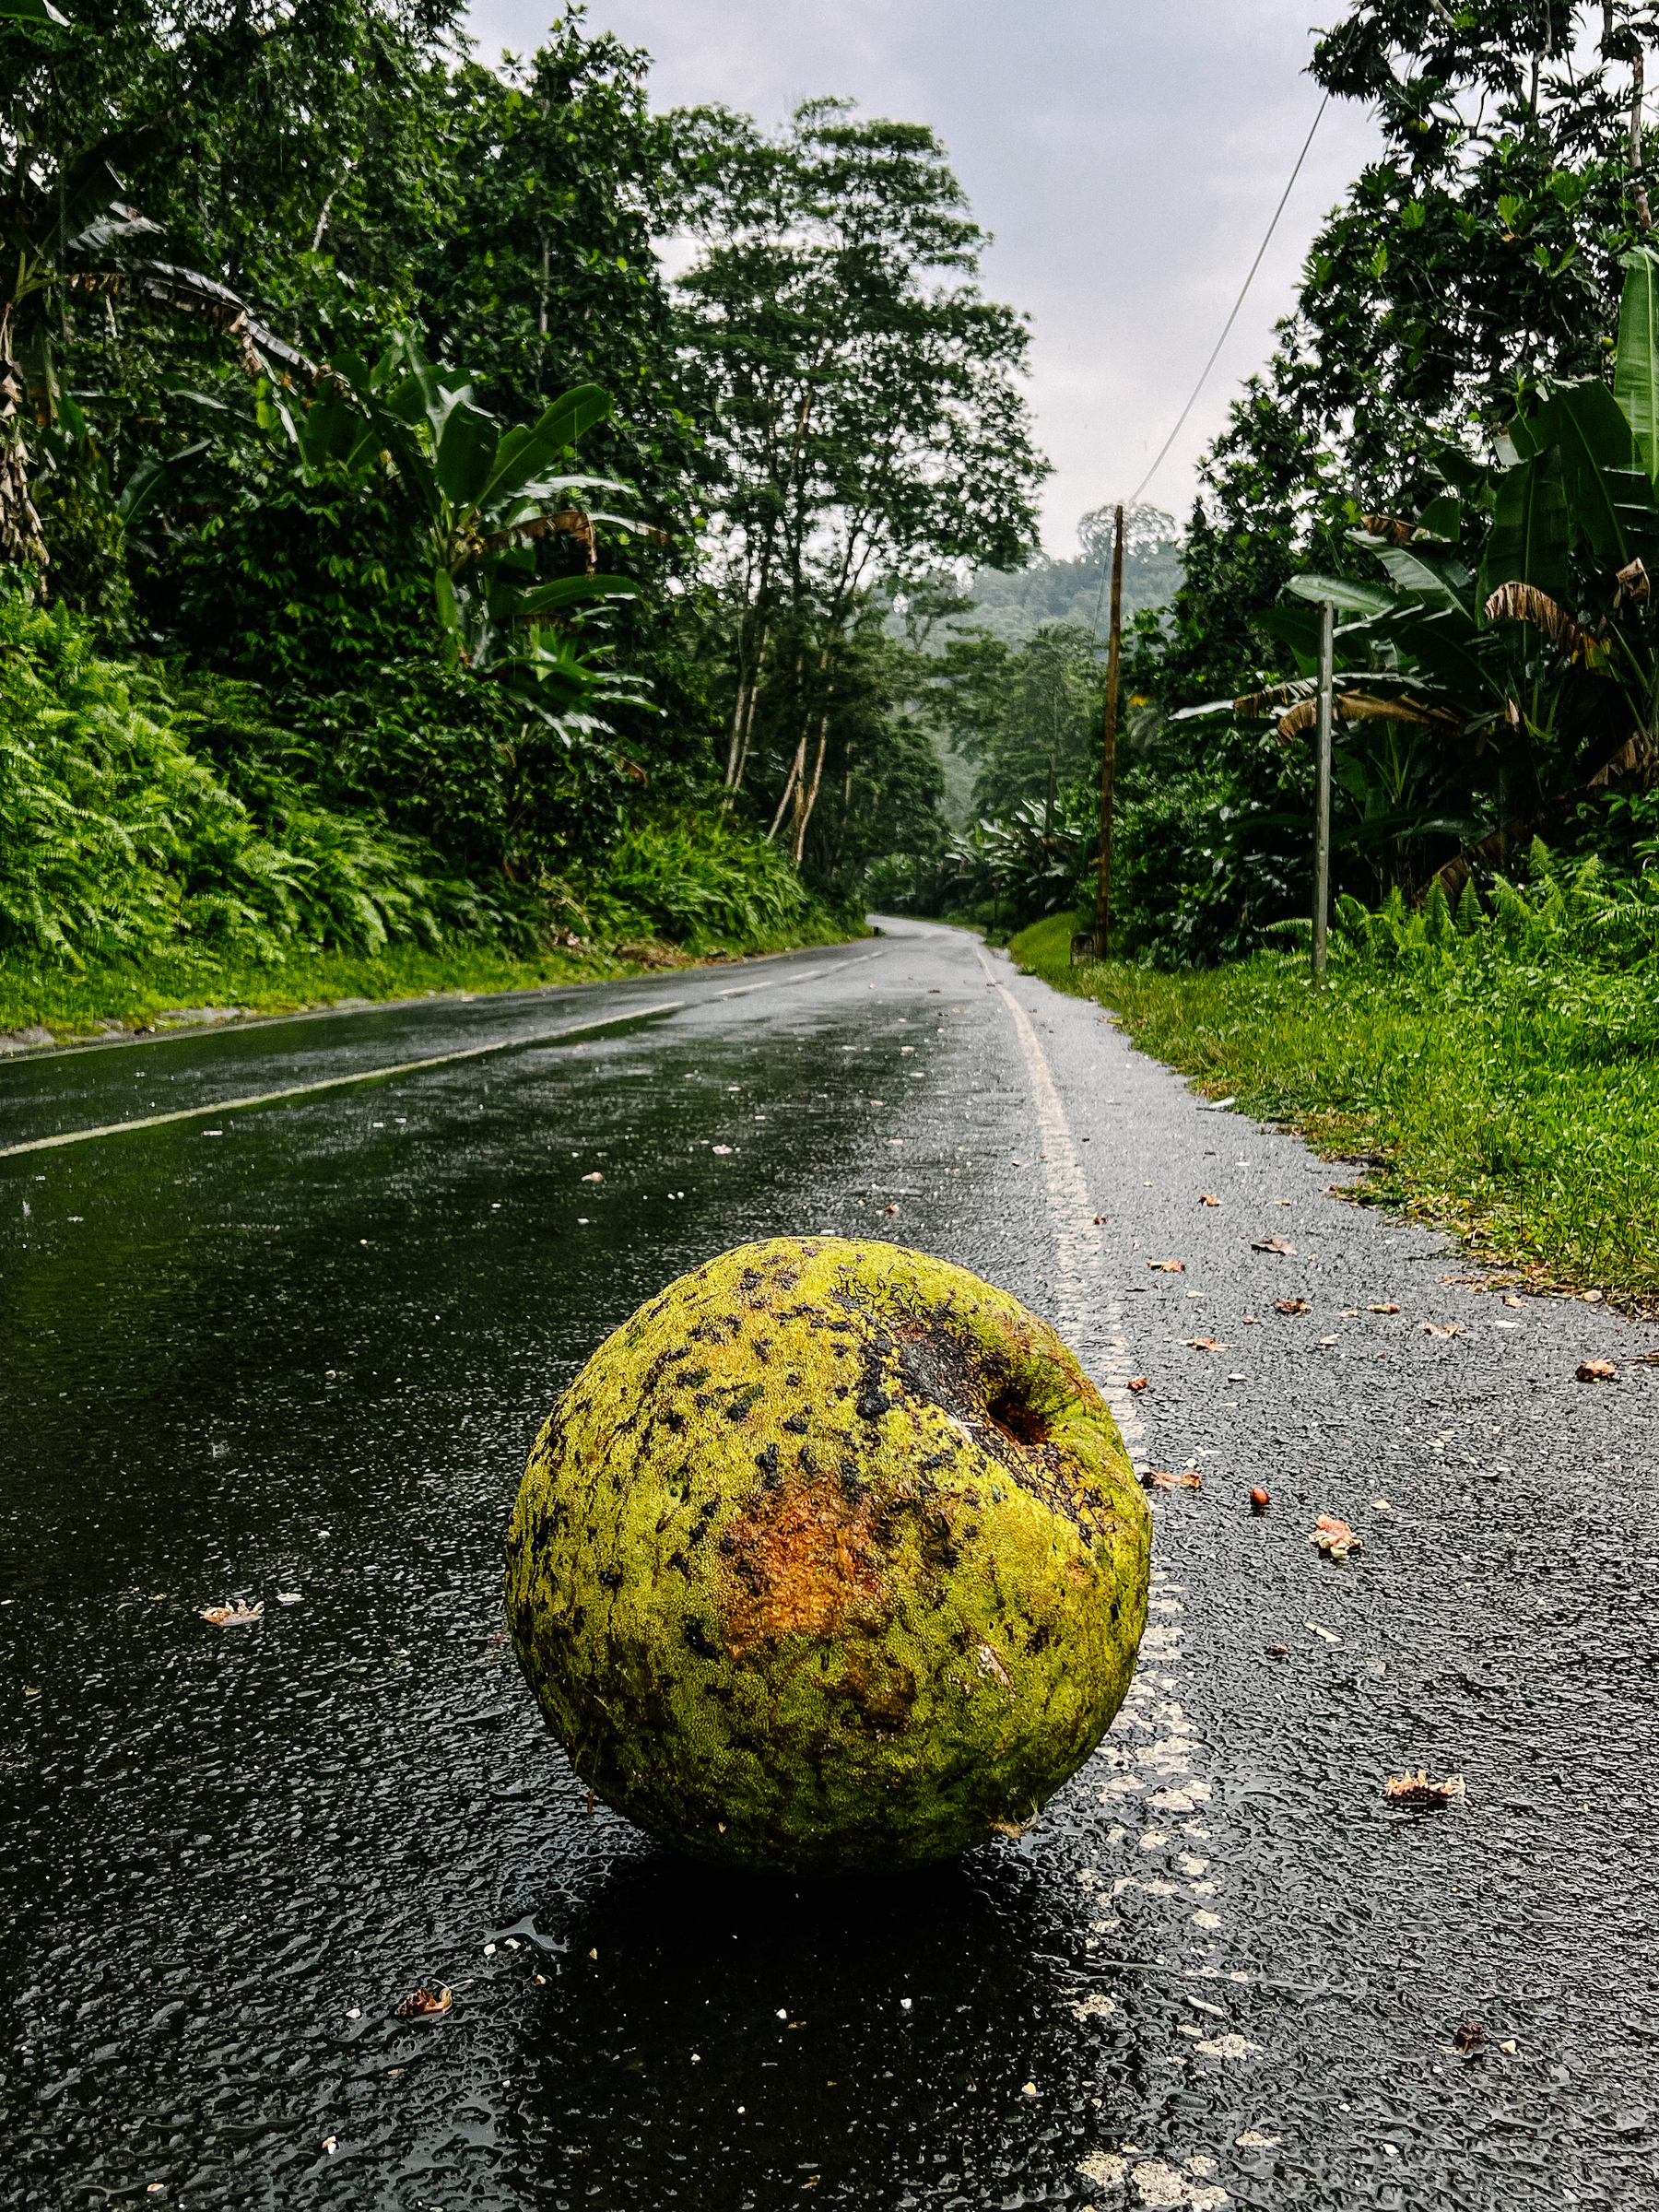 A piece of fruit on the road. 